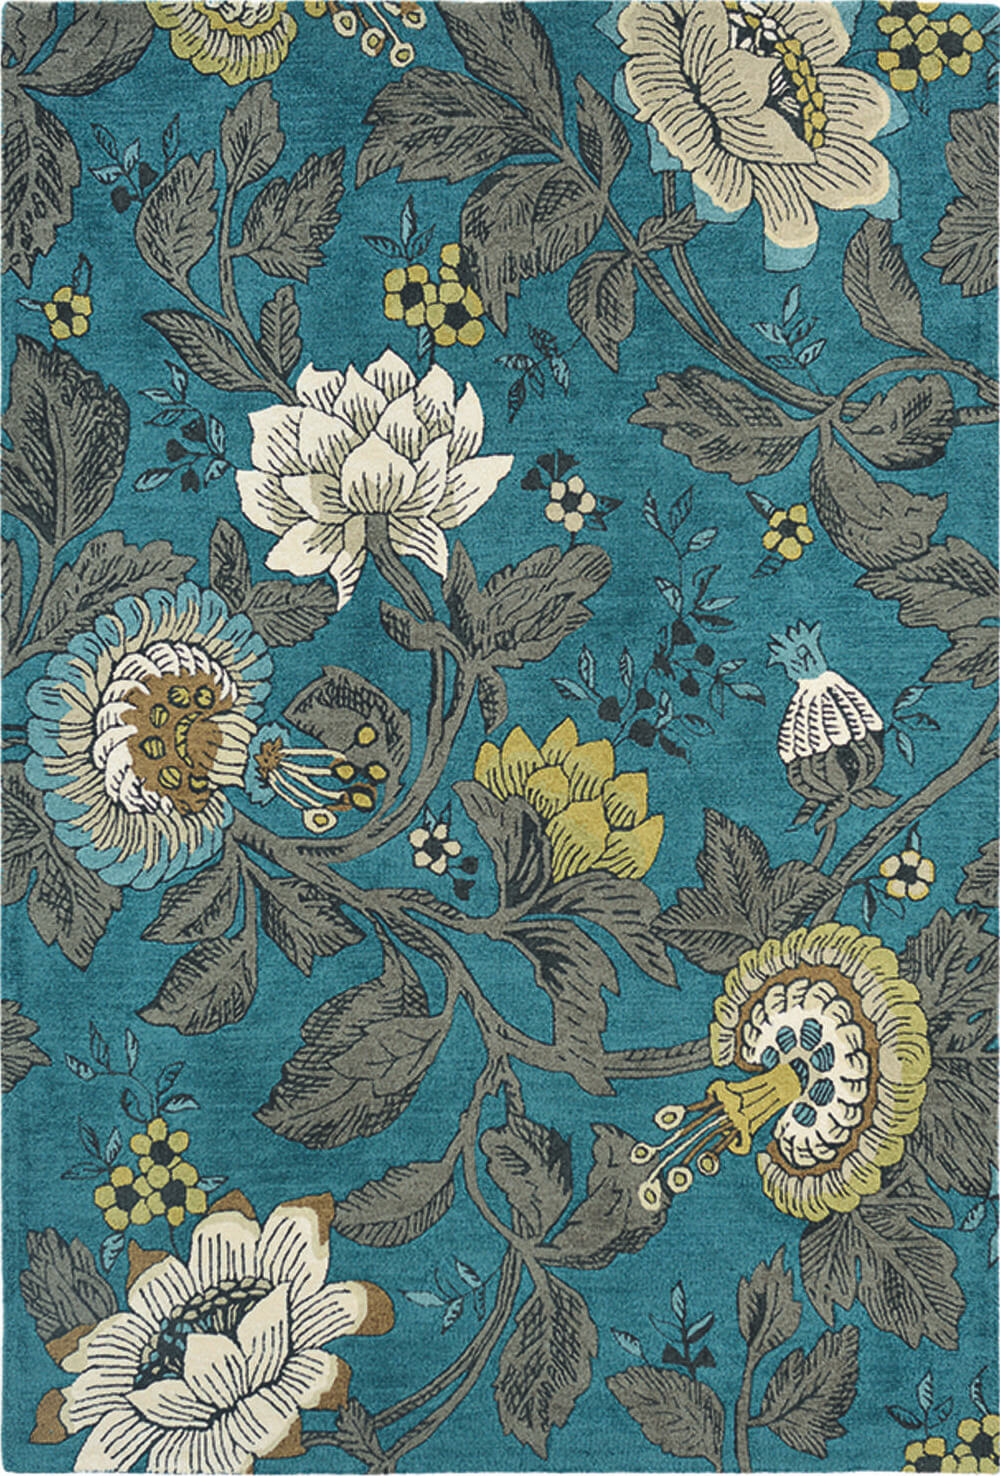 Passion Flower Teal 37117 Rug ☞ Size: 120 x 180 cm